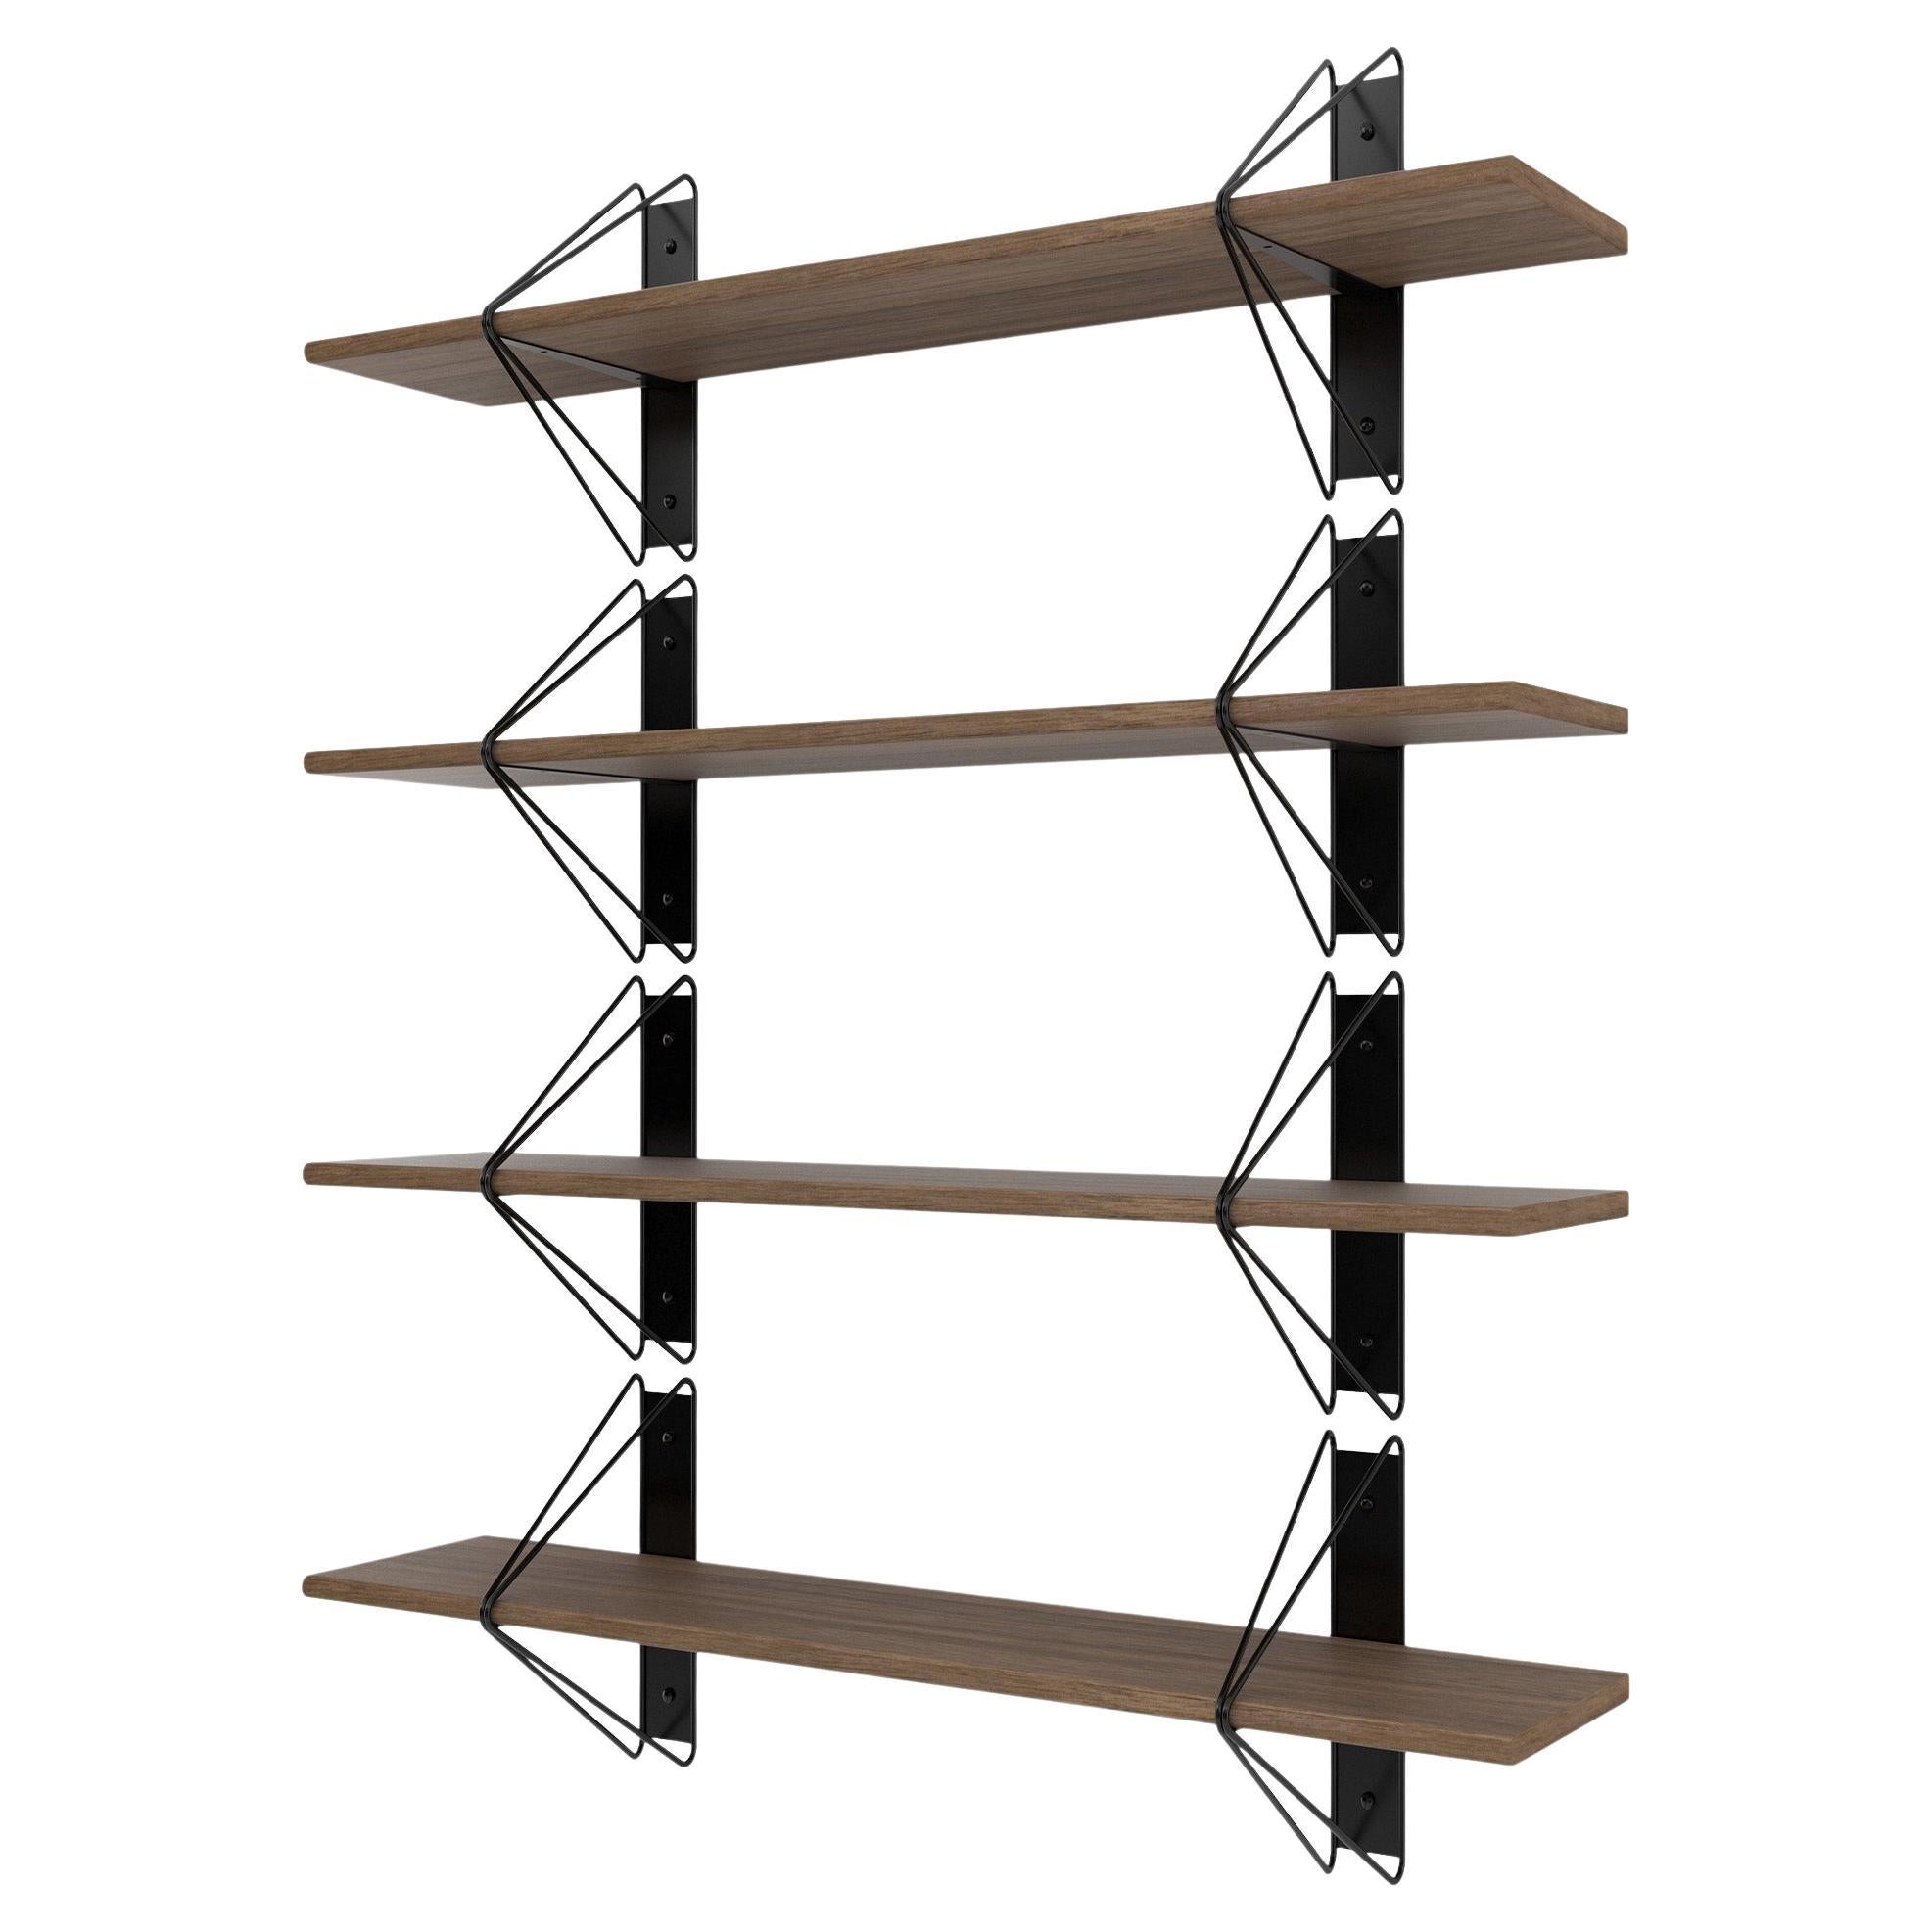 Set of 4 Strut Shelves from Souda, 52in, Black and Walnut, Made to Order For Sale